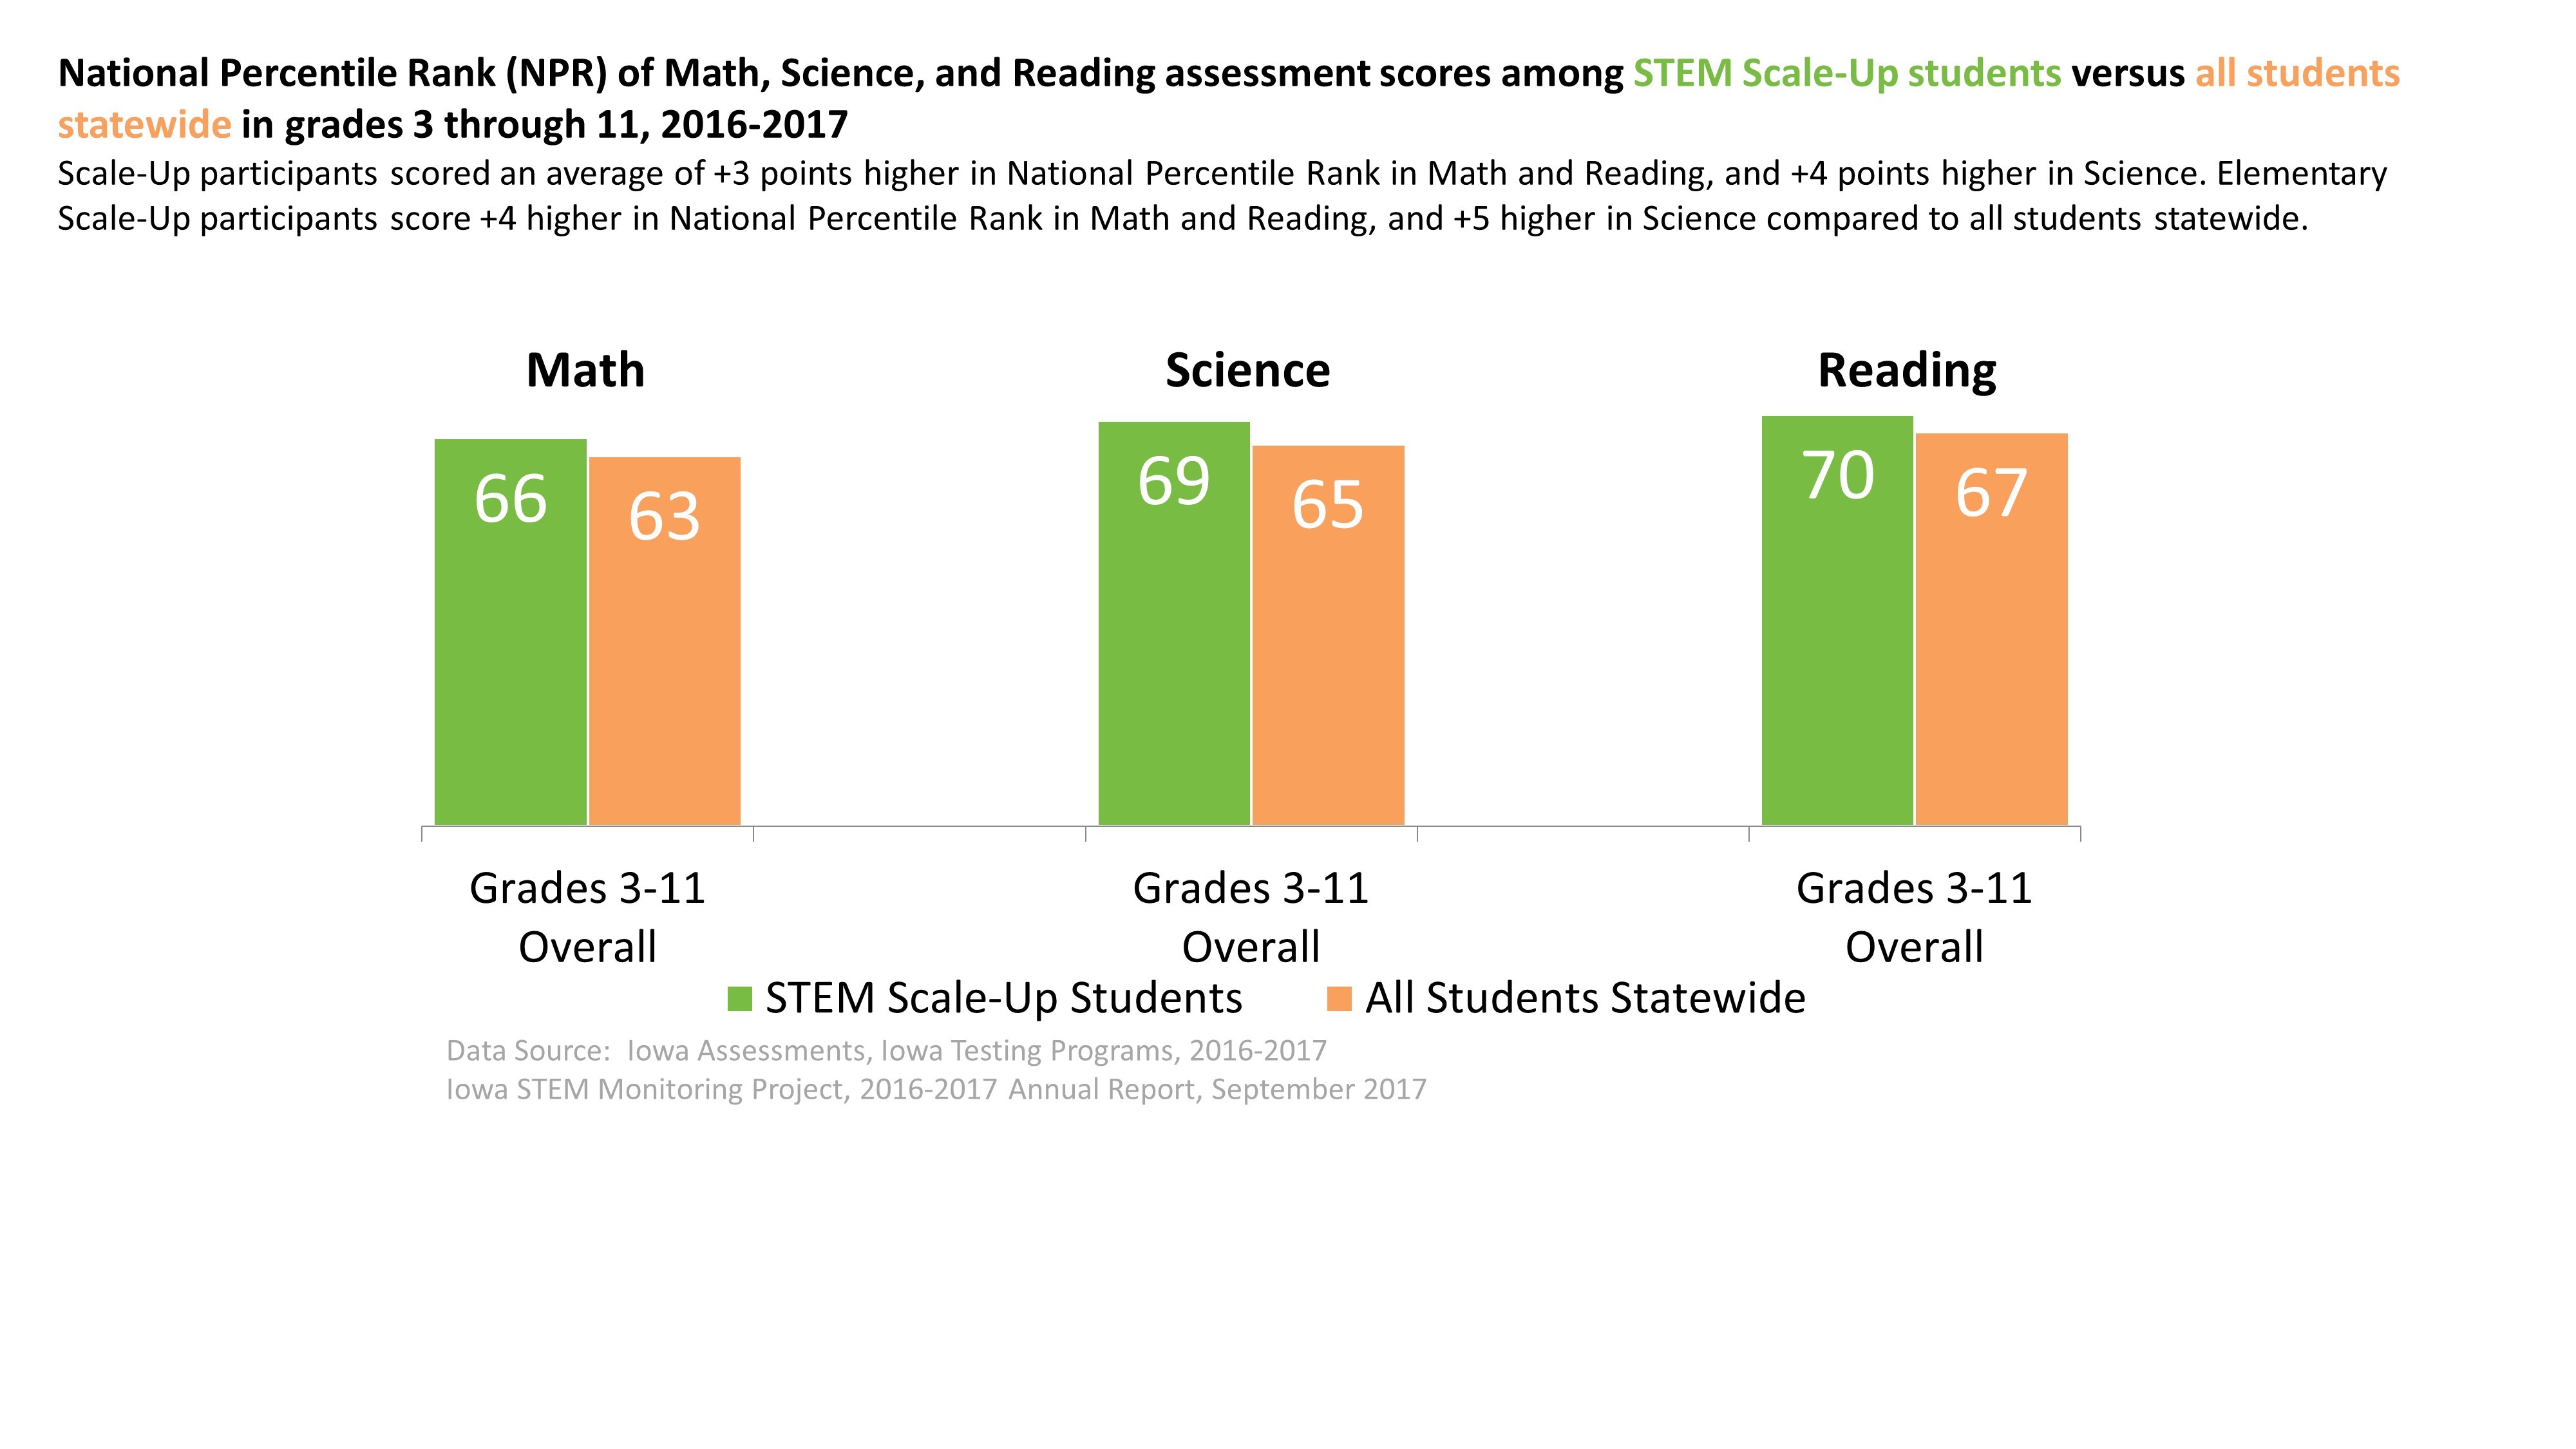 STEM student scores compared to national average